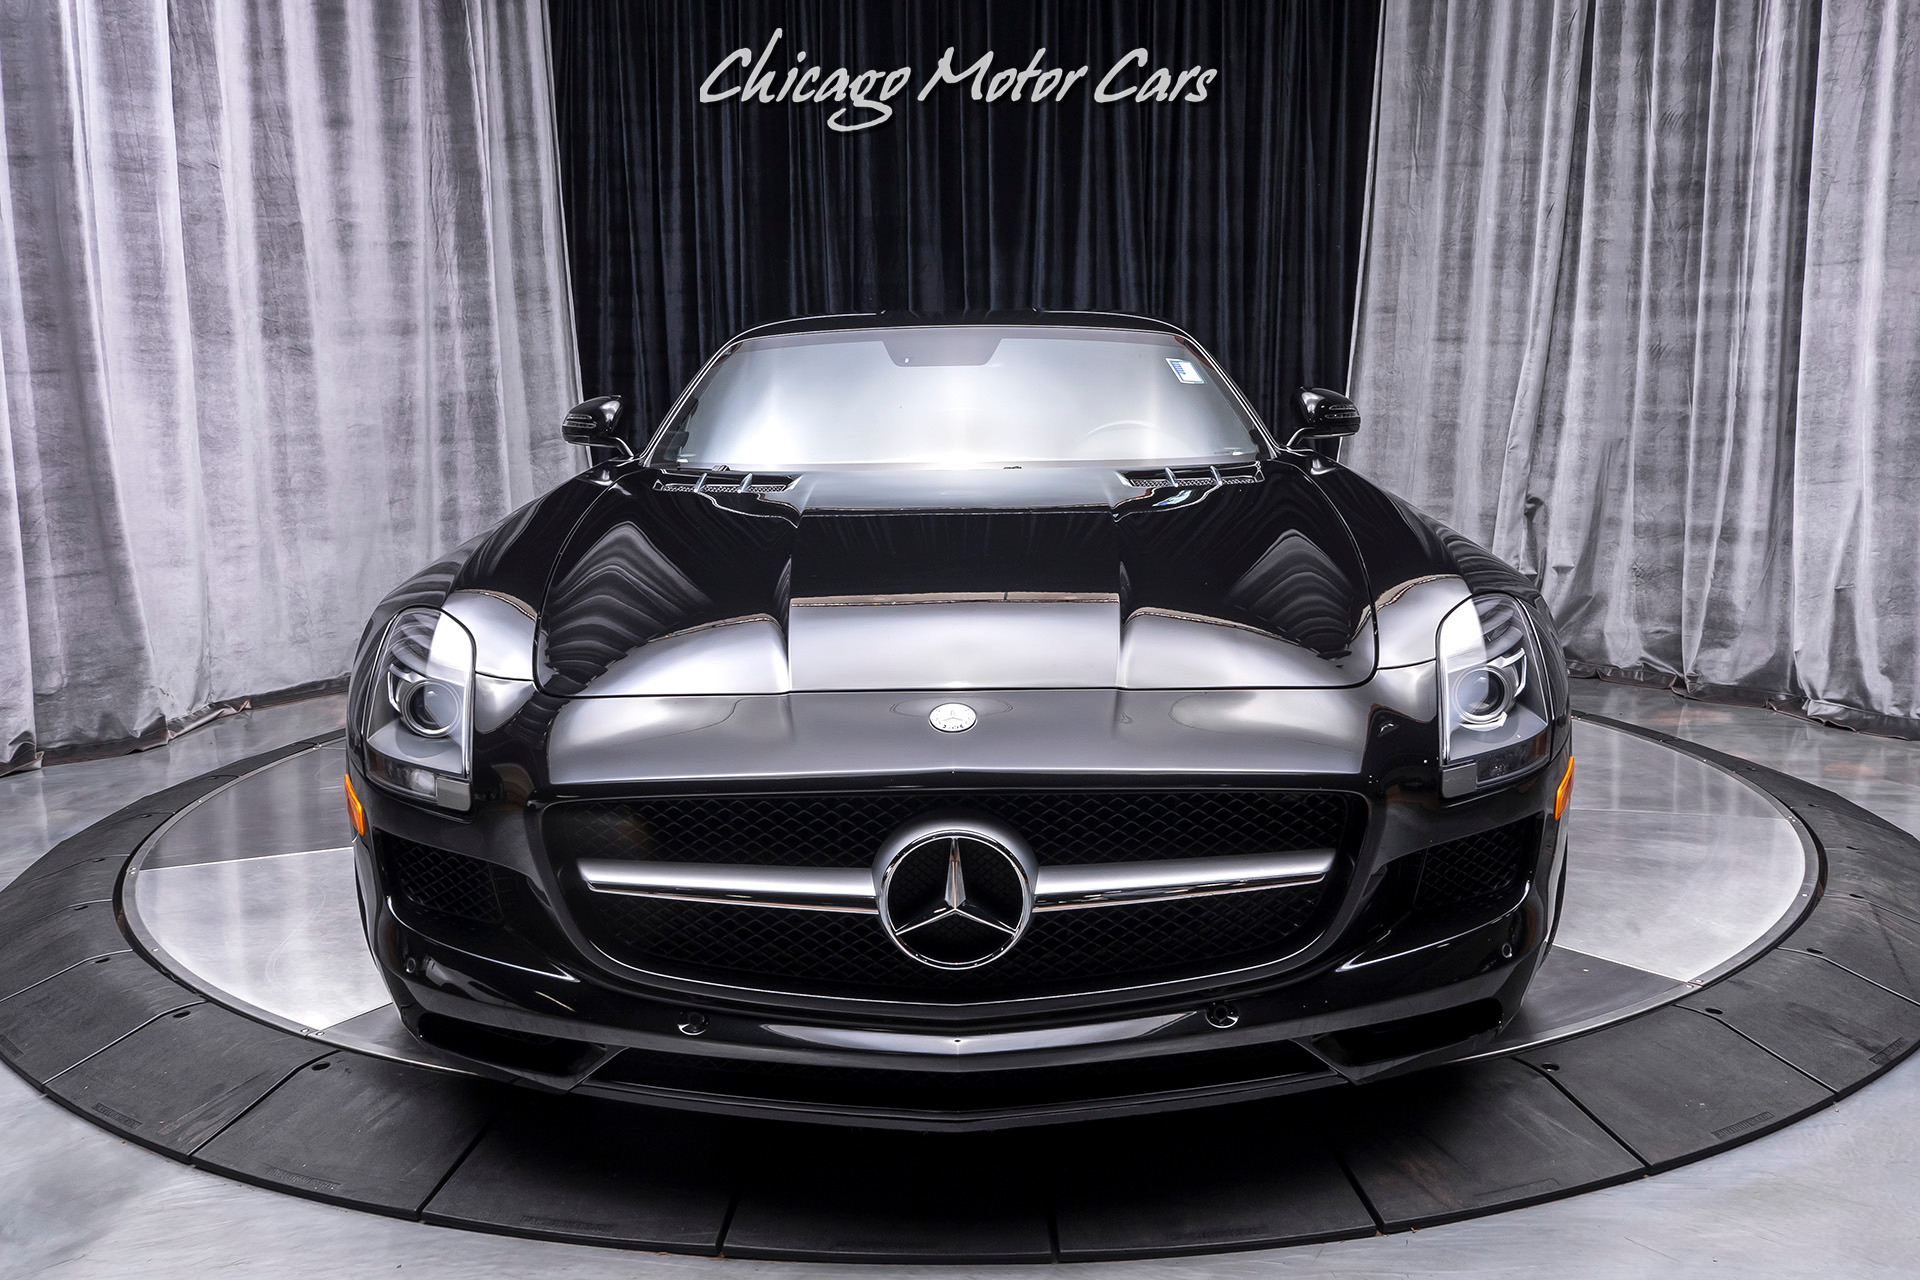 Used-2011-Mercedes-Benz-SLS-AMG-Gullwing-Coupe-MSRP-195K-BANG---OLUFSEN-SOUND-SYSTEM